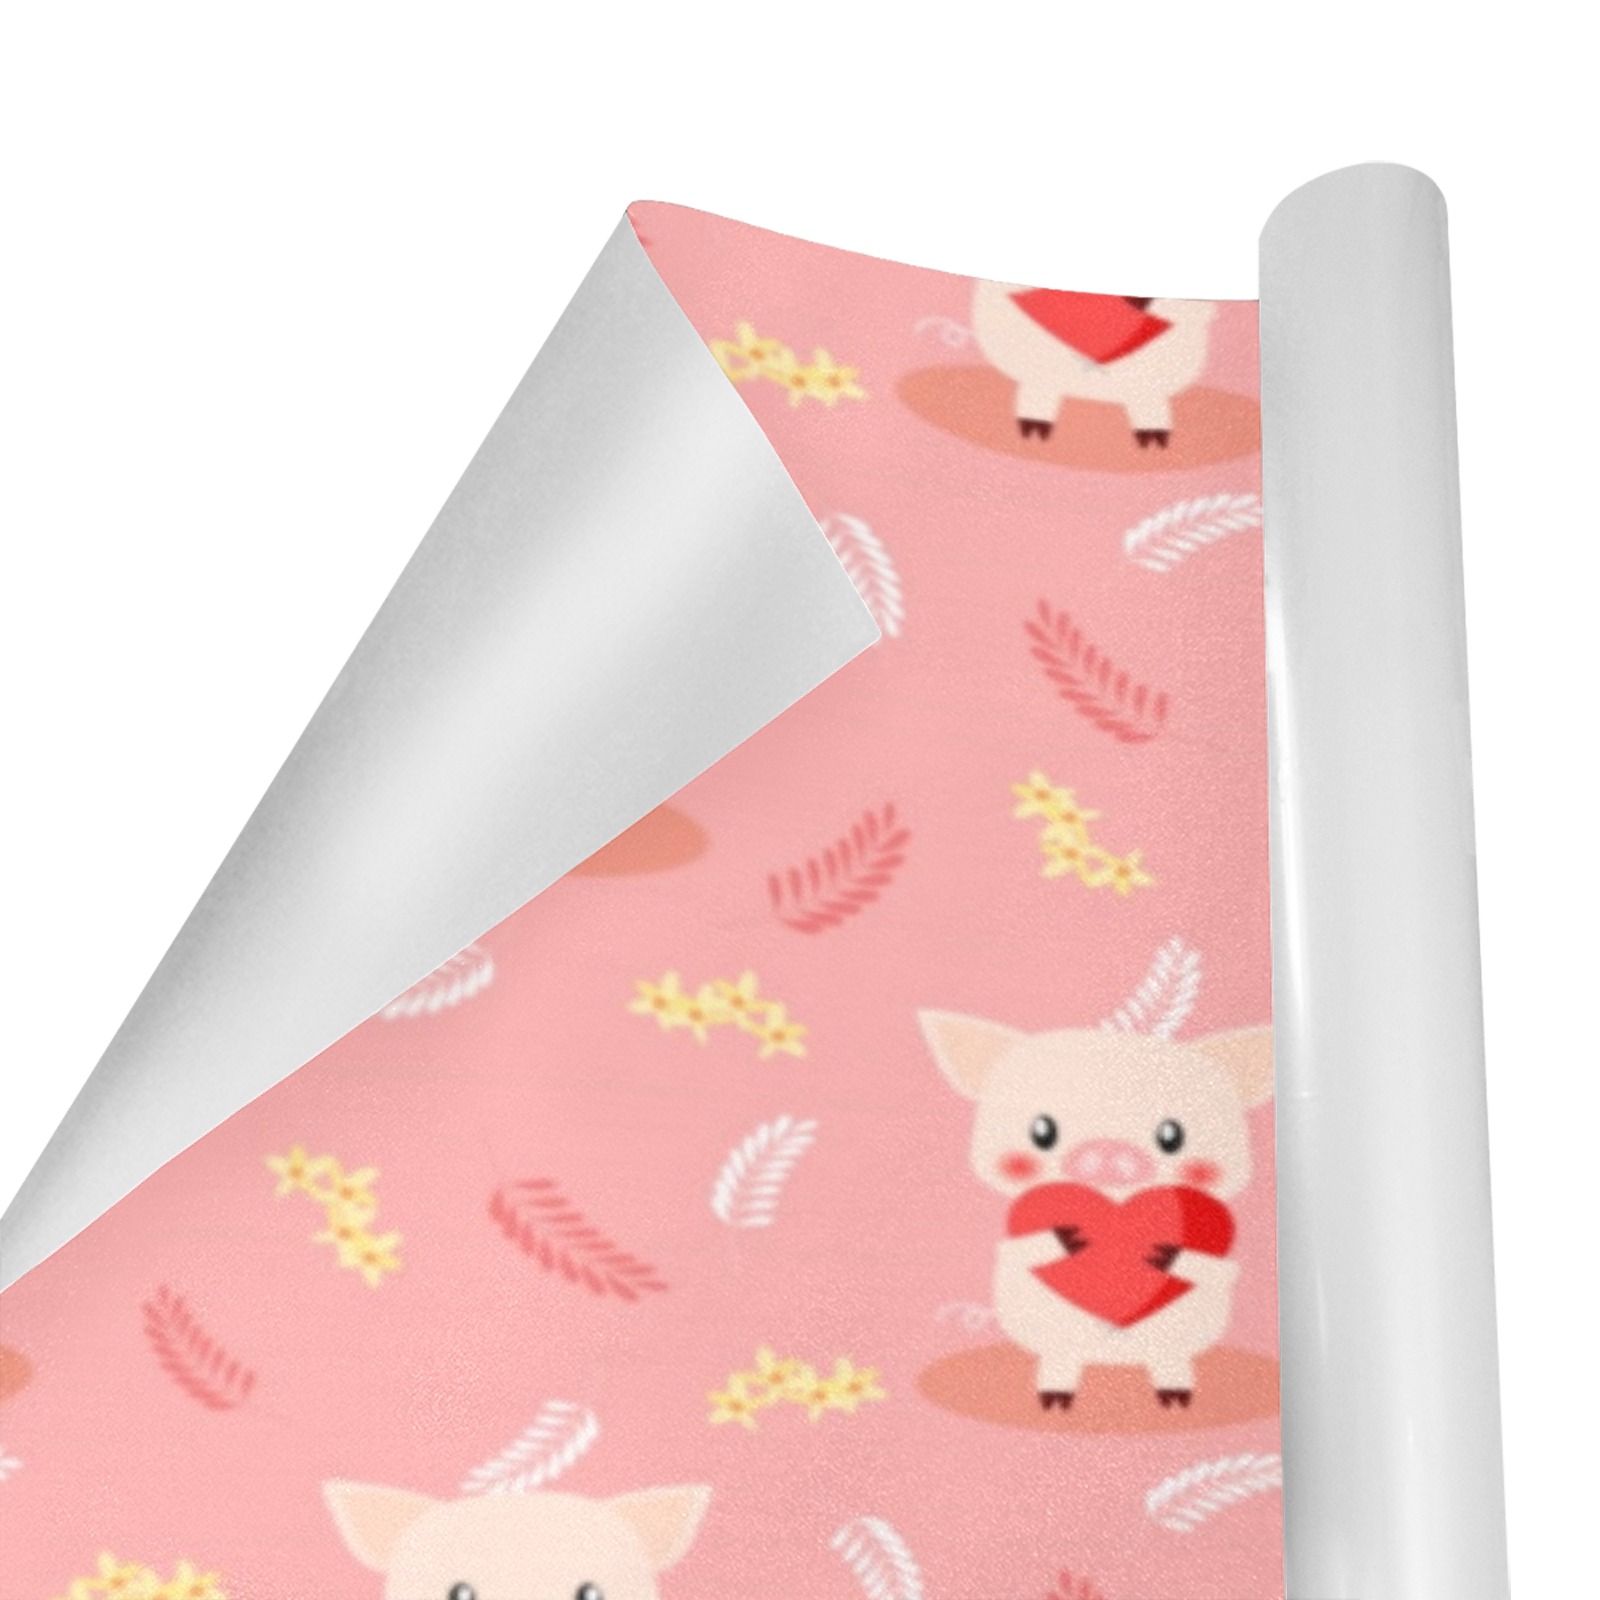 Cute Pig Love Pattern Gift Wrapping Paper 58"x 23" (1 Roll)